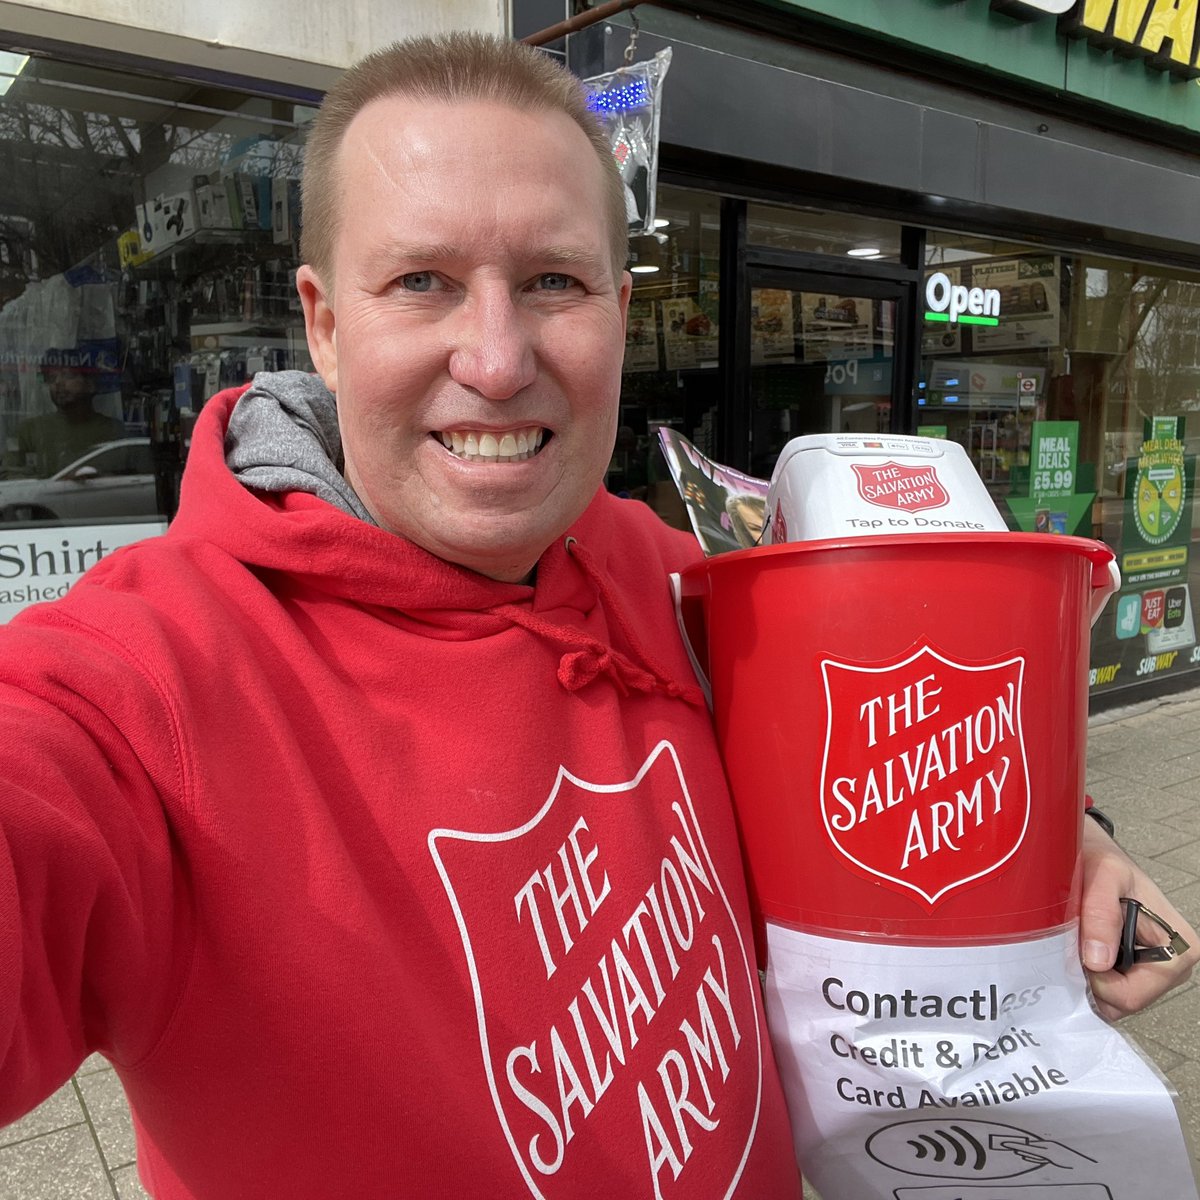 This lunchtime I’m engaged in some Street Mission in New Malden (near Subway). If you see me please come and say 'hello'. A big 'Thank You' to everyone who is donating, let's build community together.

#newmalden #raynespark #TheSalvationArmy #RaynesParkCommunityChurch